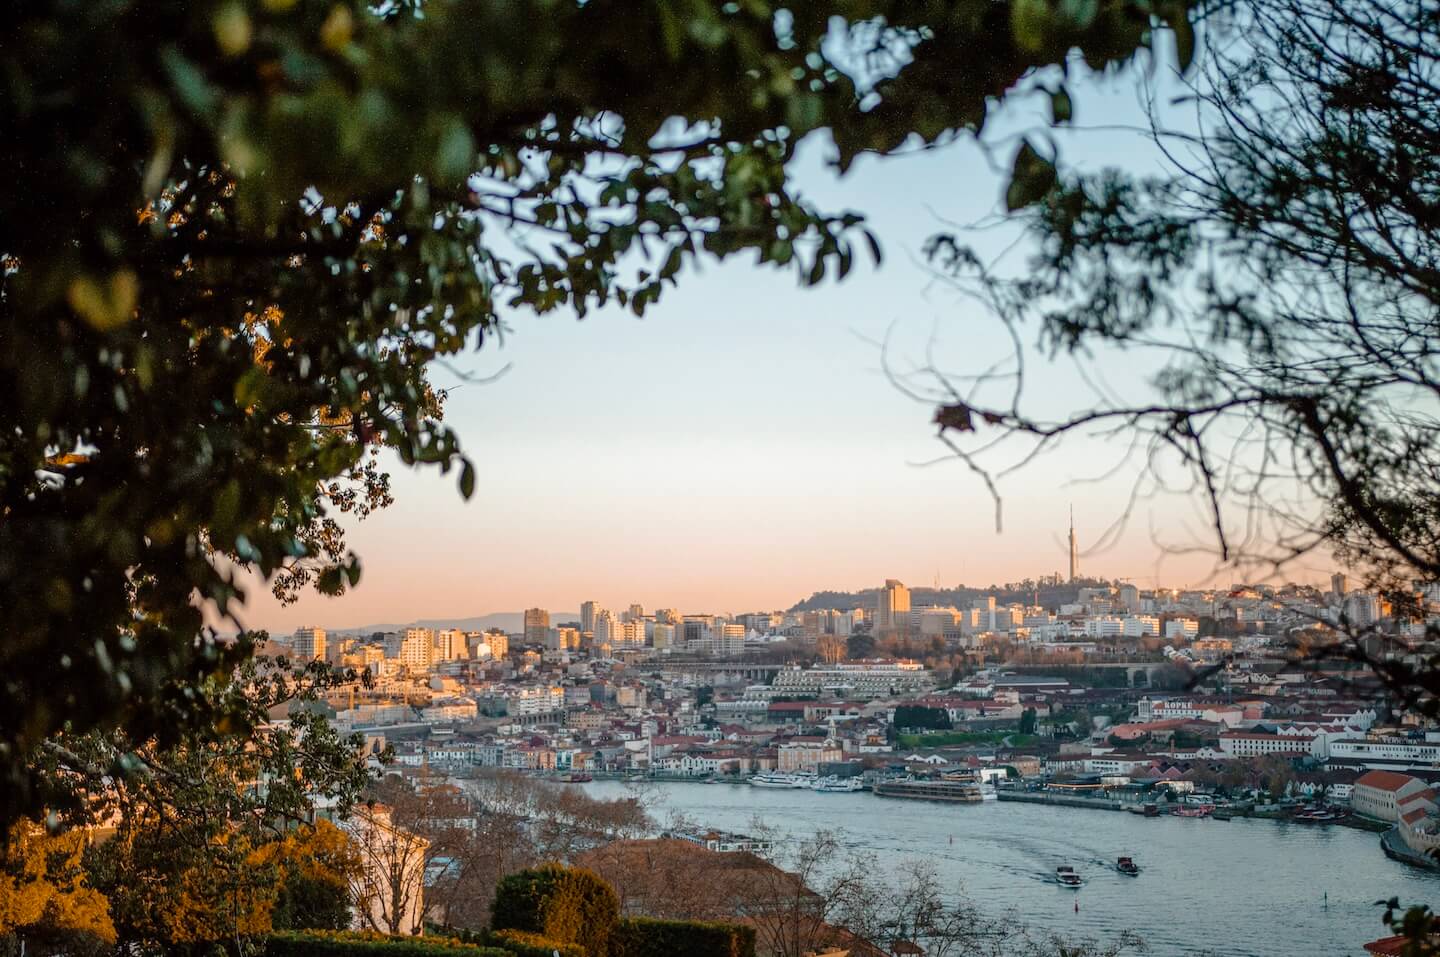 Sunset view of whole Porto and river from the top or park.